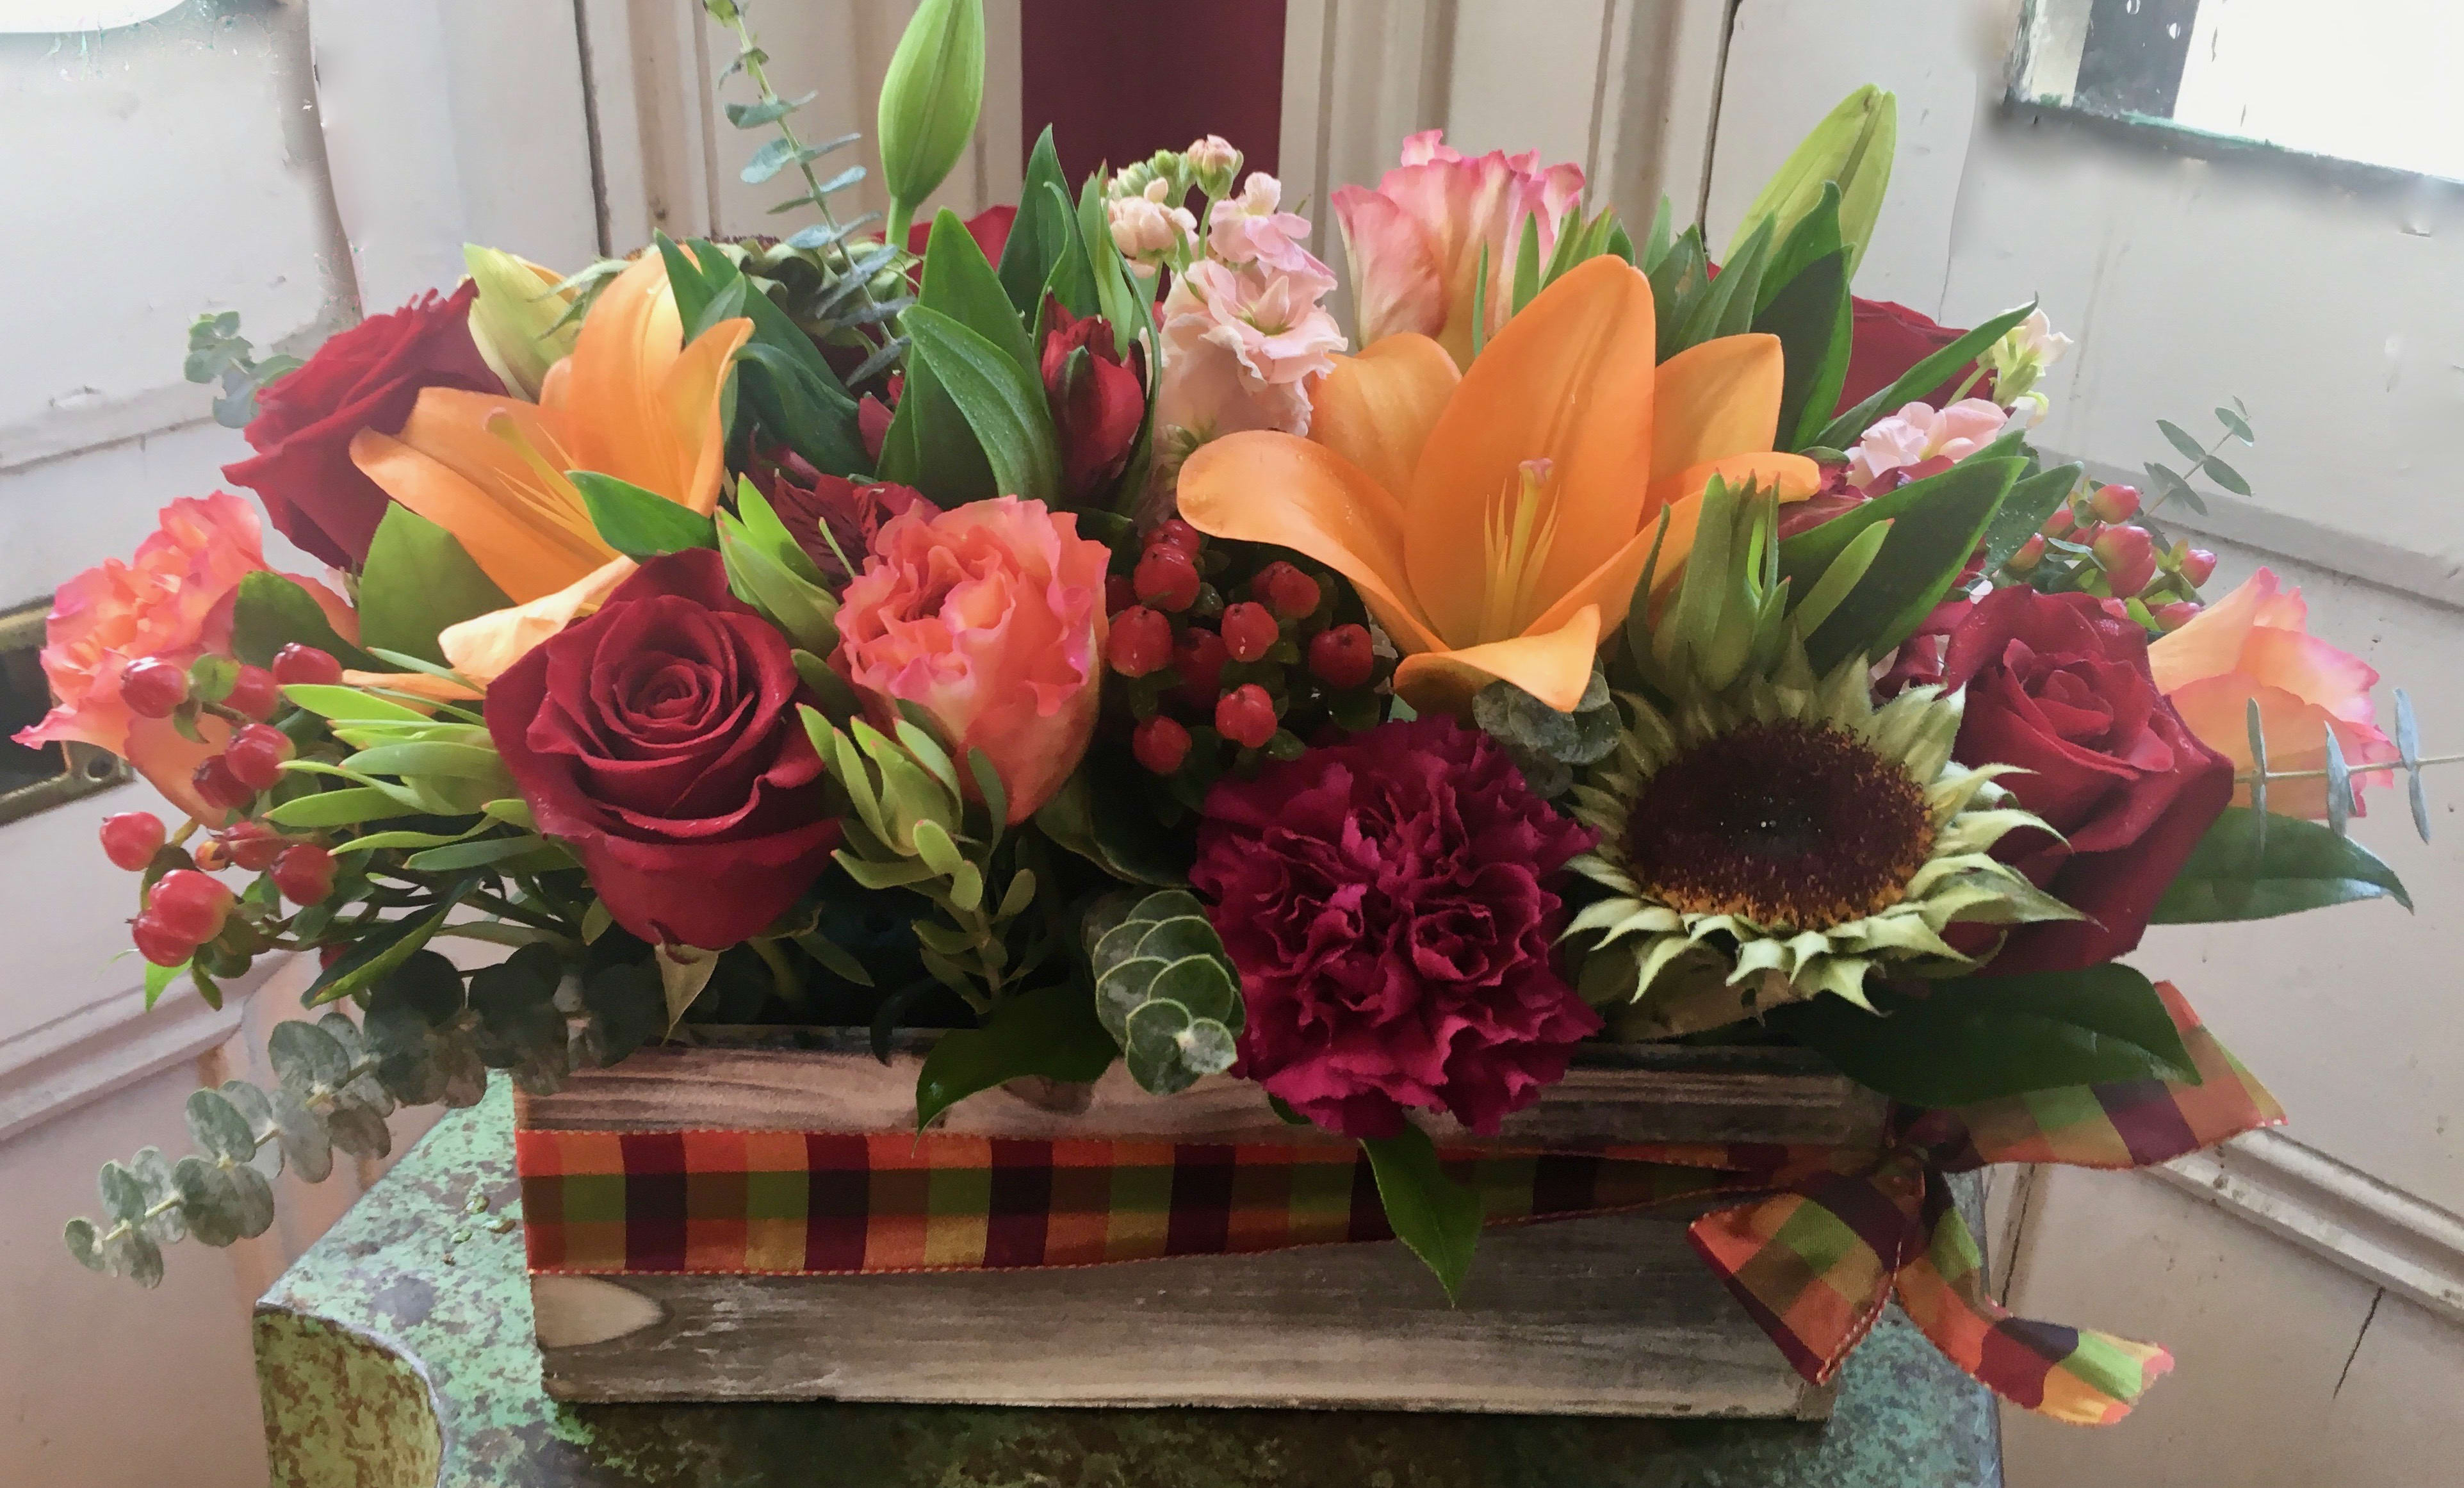 The Darling Nico - A lovely and rustic fall mix of roses, lilies and stock. This one is perfect as a gift or as a Thanksgiving centerpiece.